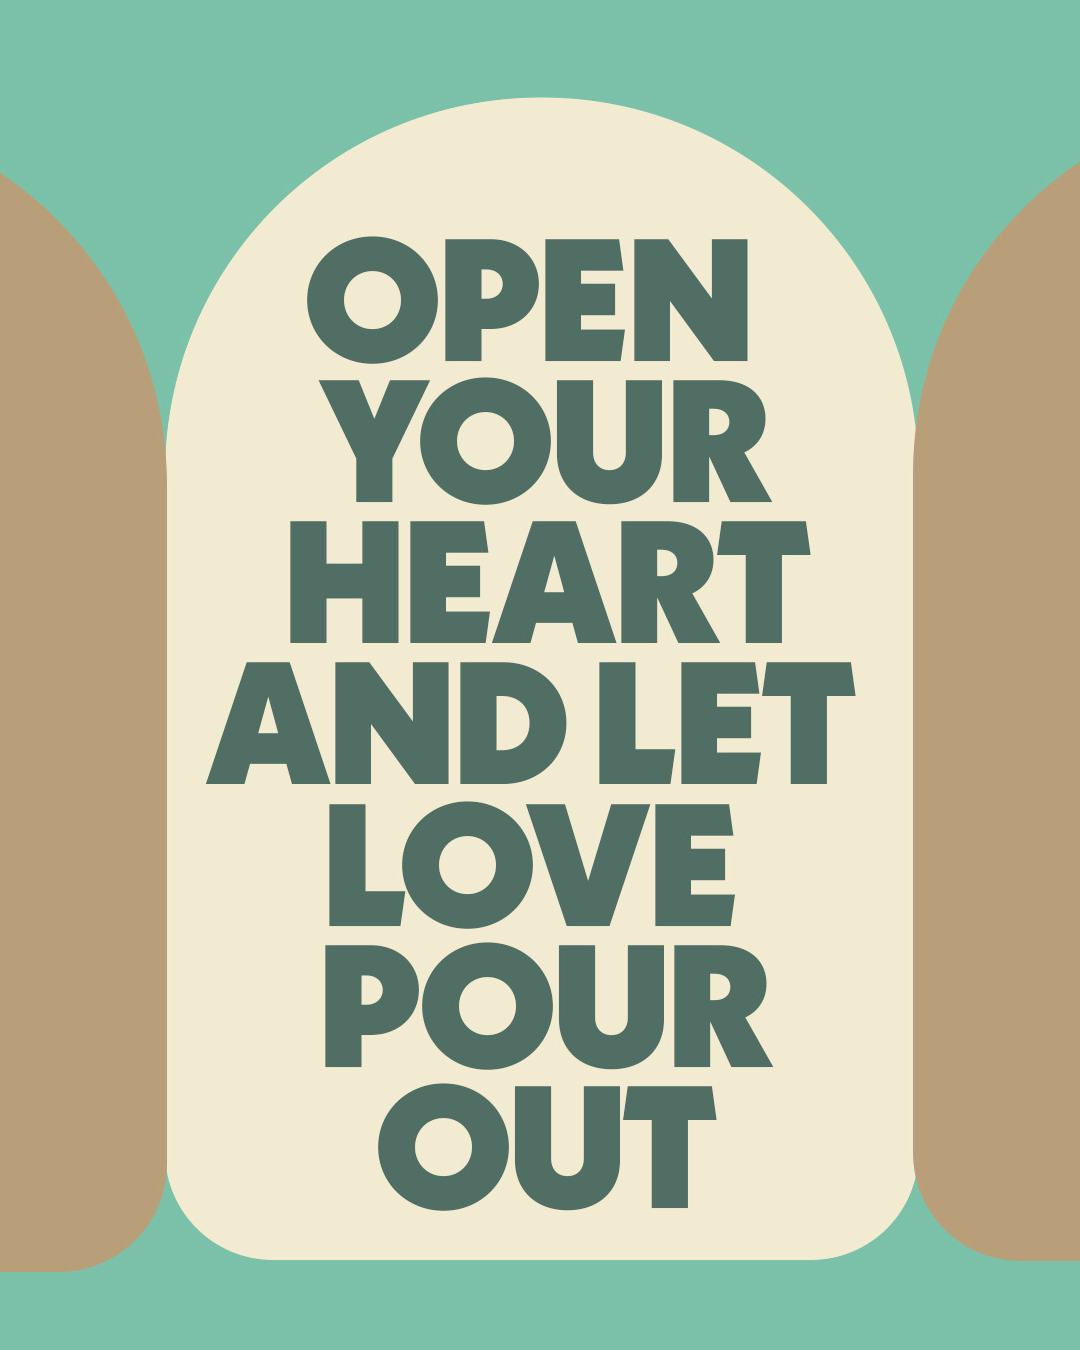 Open your heart and let love pour out